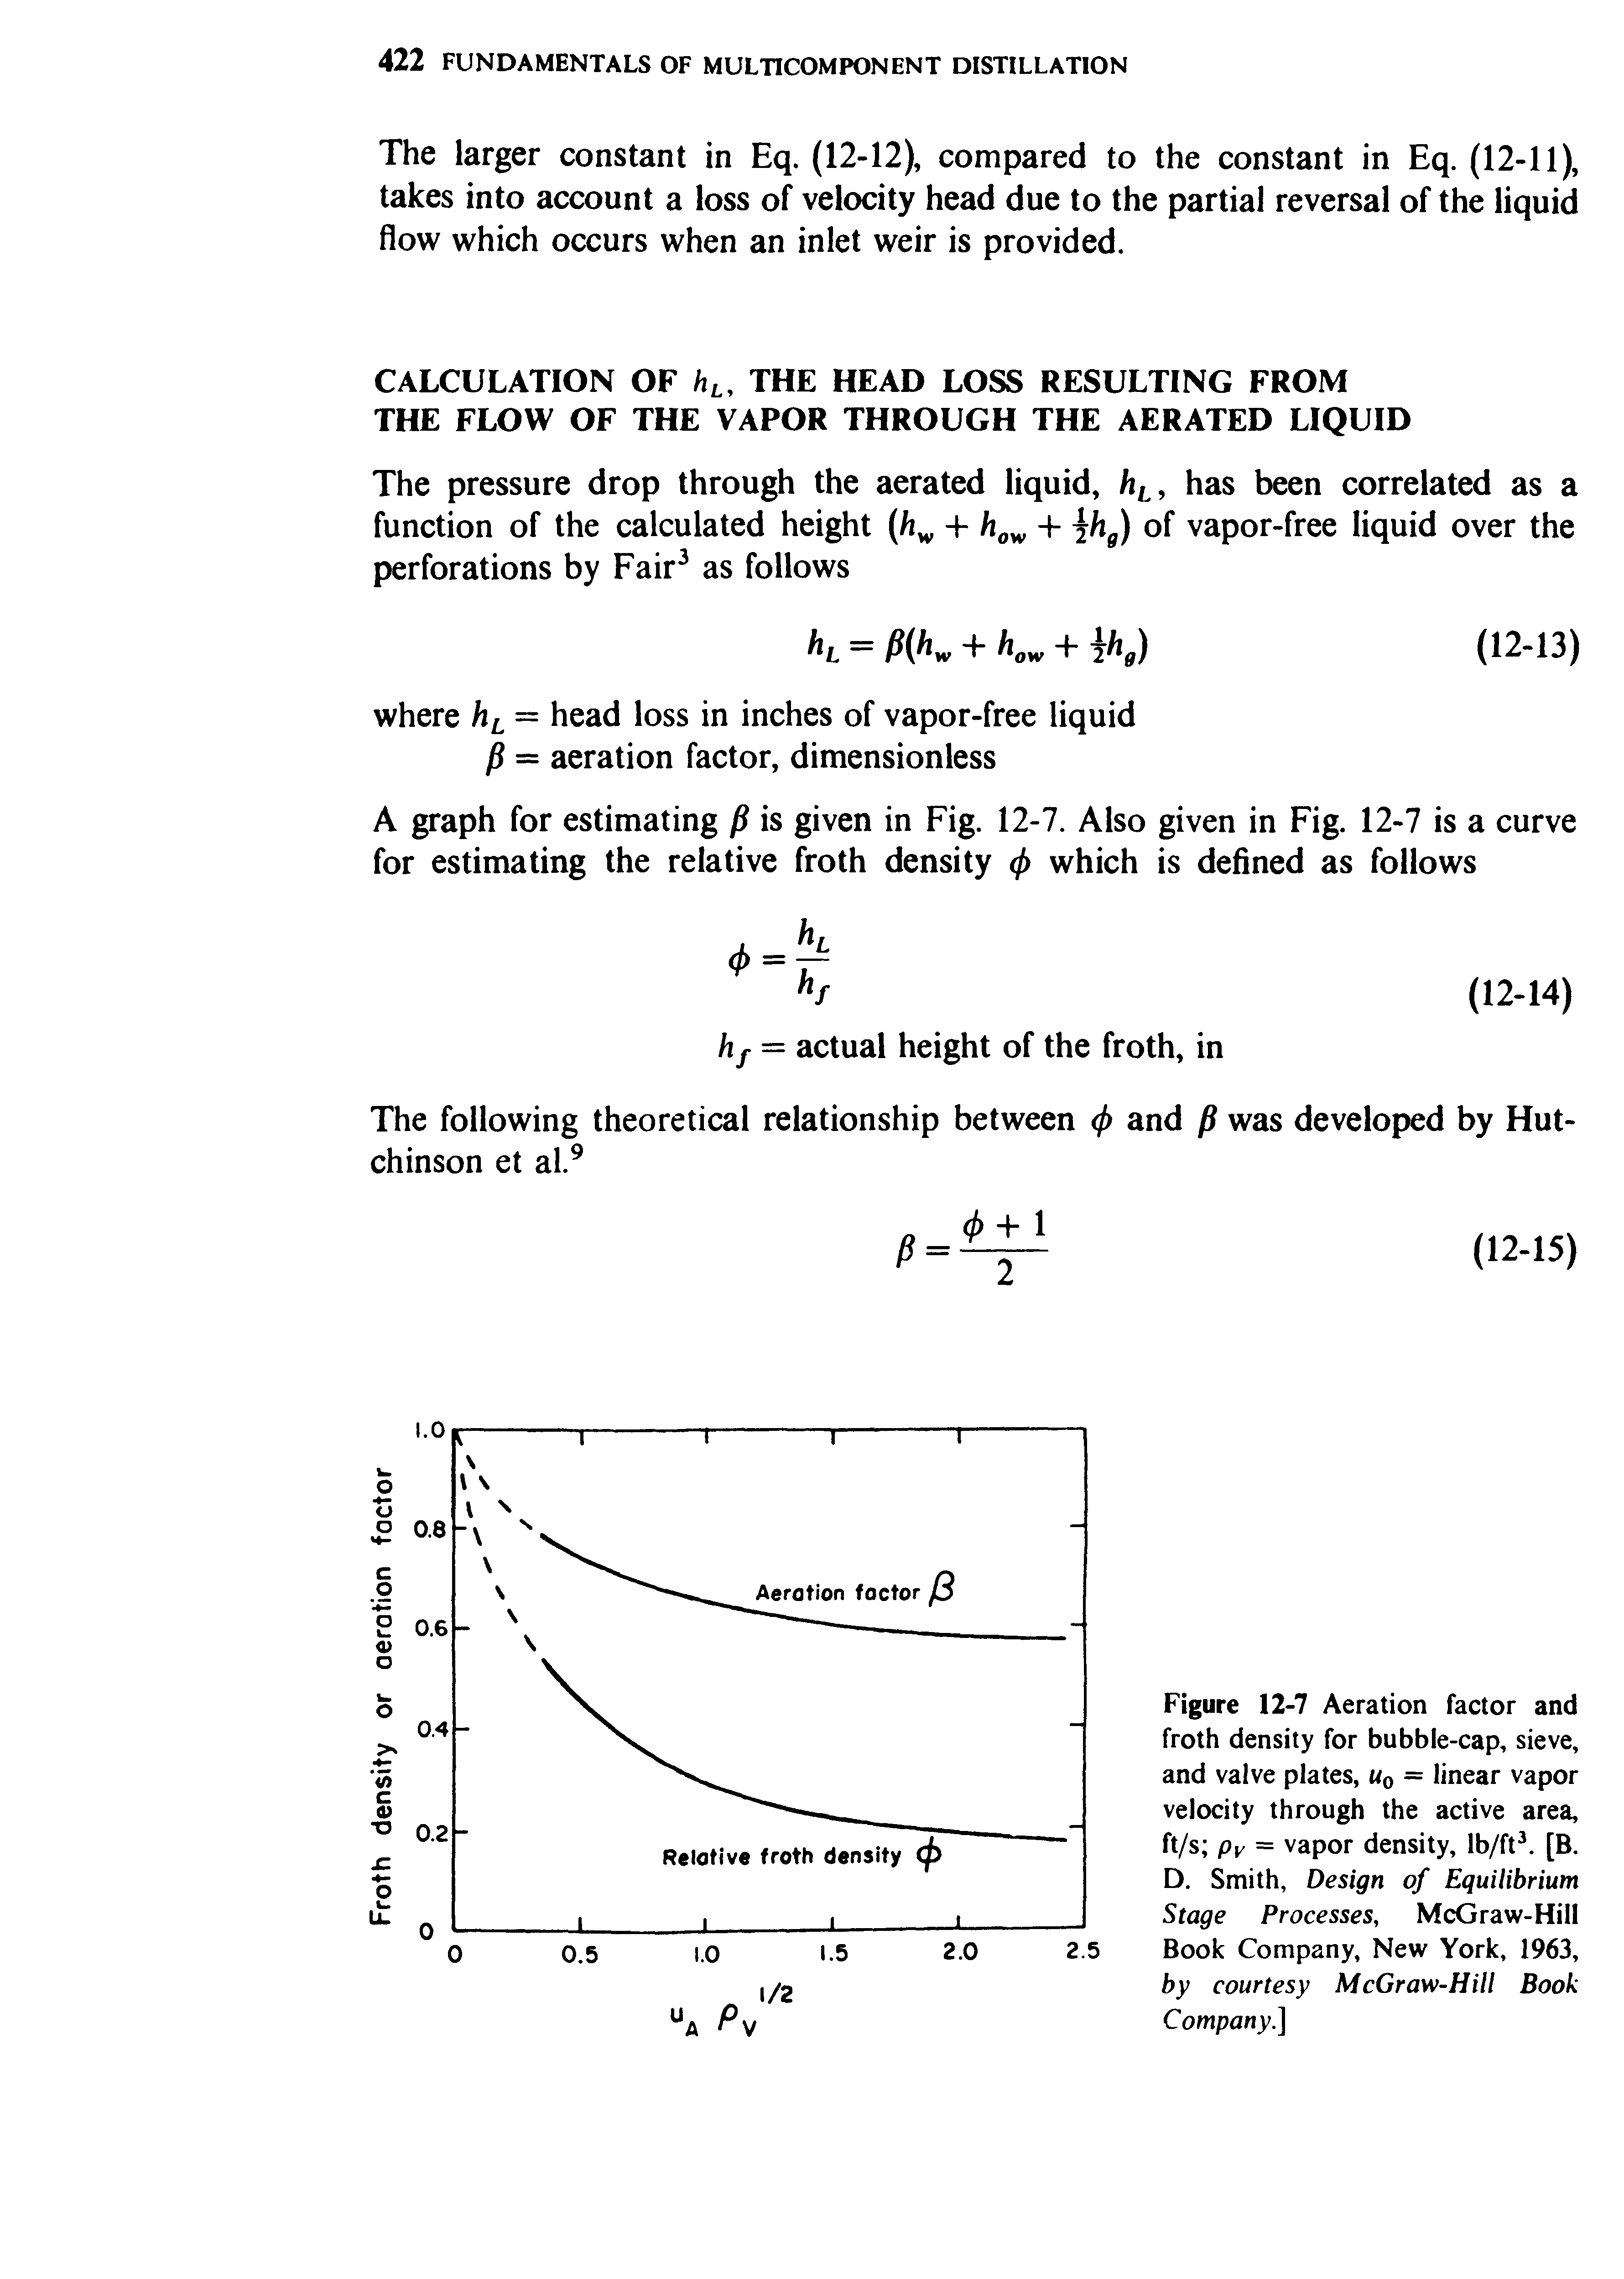 Figure 12-7 Aeration factor and froth density for bubble-cap, sieve, and valve plates, u0 = linear vapor velocity through the active area, ft/s pv = vapor density, lb/ft3. [B. D. Smith, Design of Equilibrium Stage Processes, McGraw-Hill Book Company, New York, 1963, by courtesy McGraw-Hill Book Company.]...